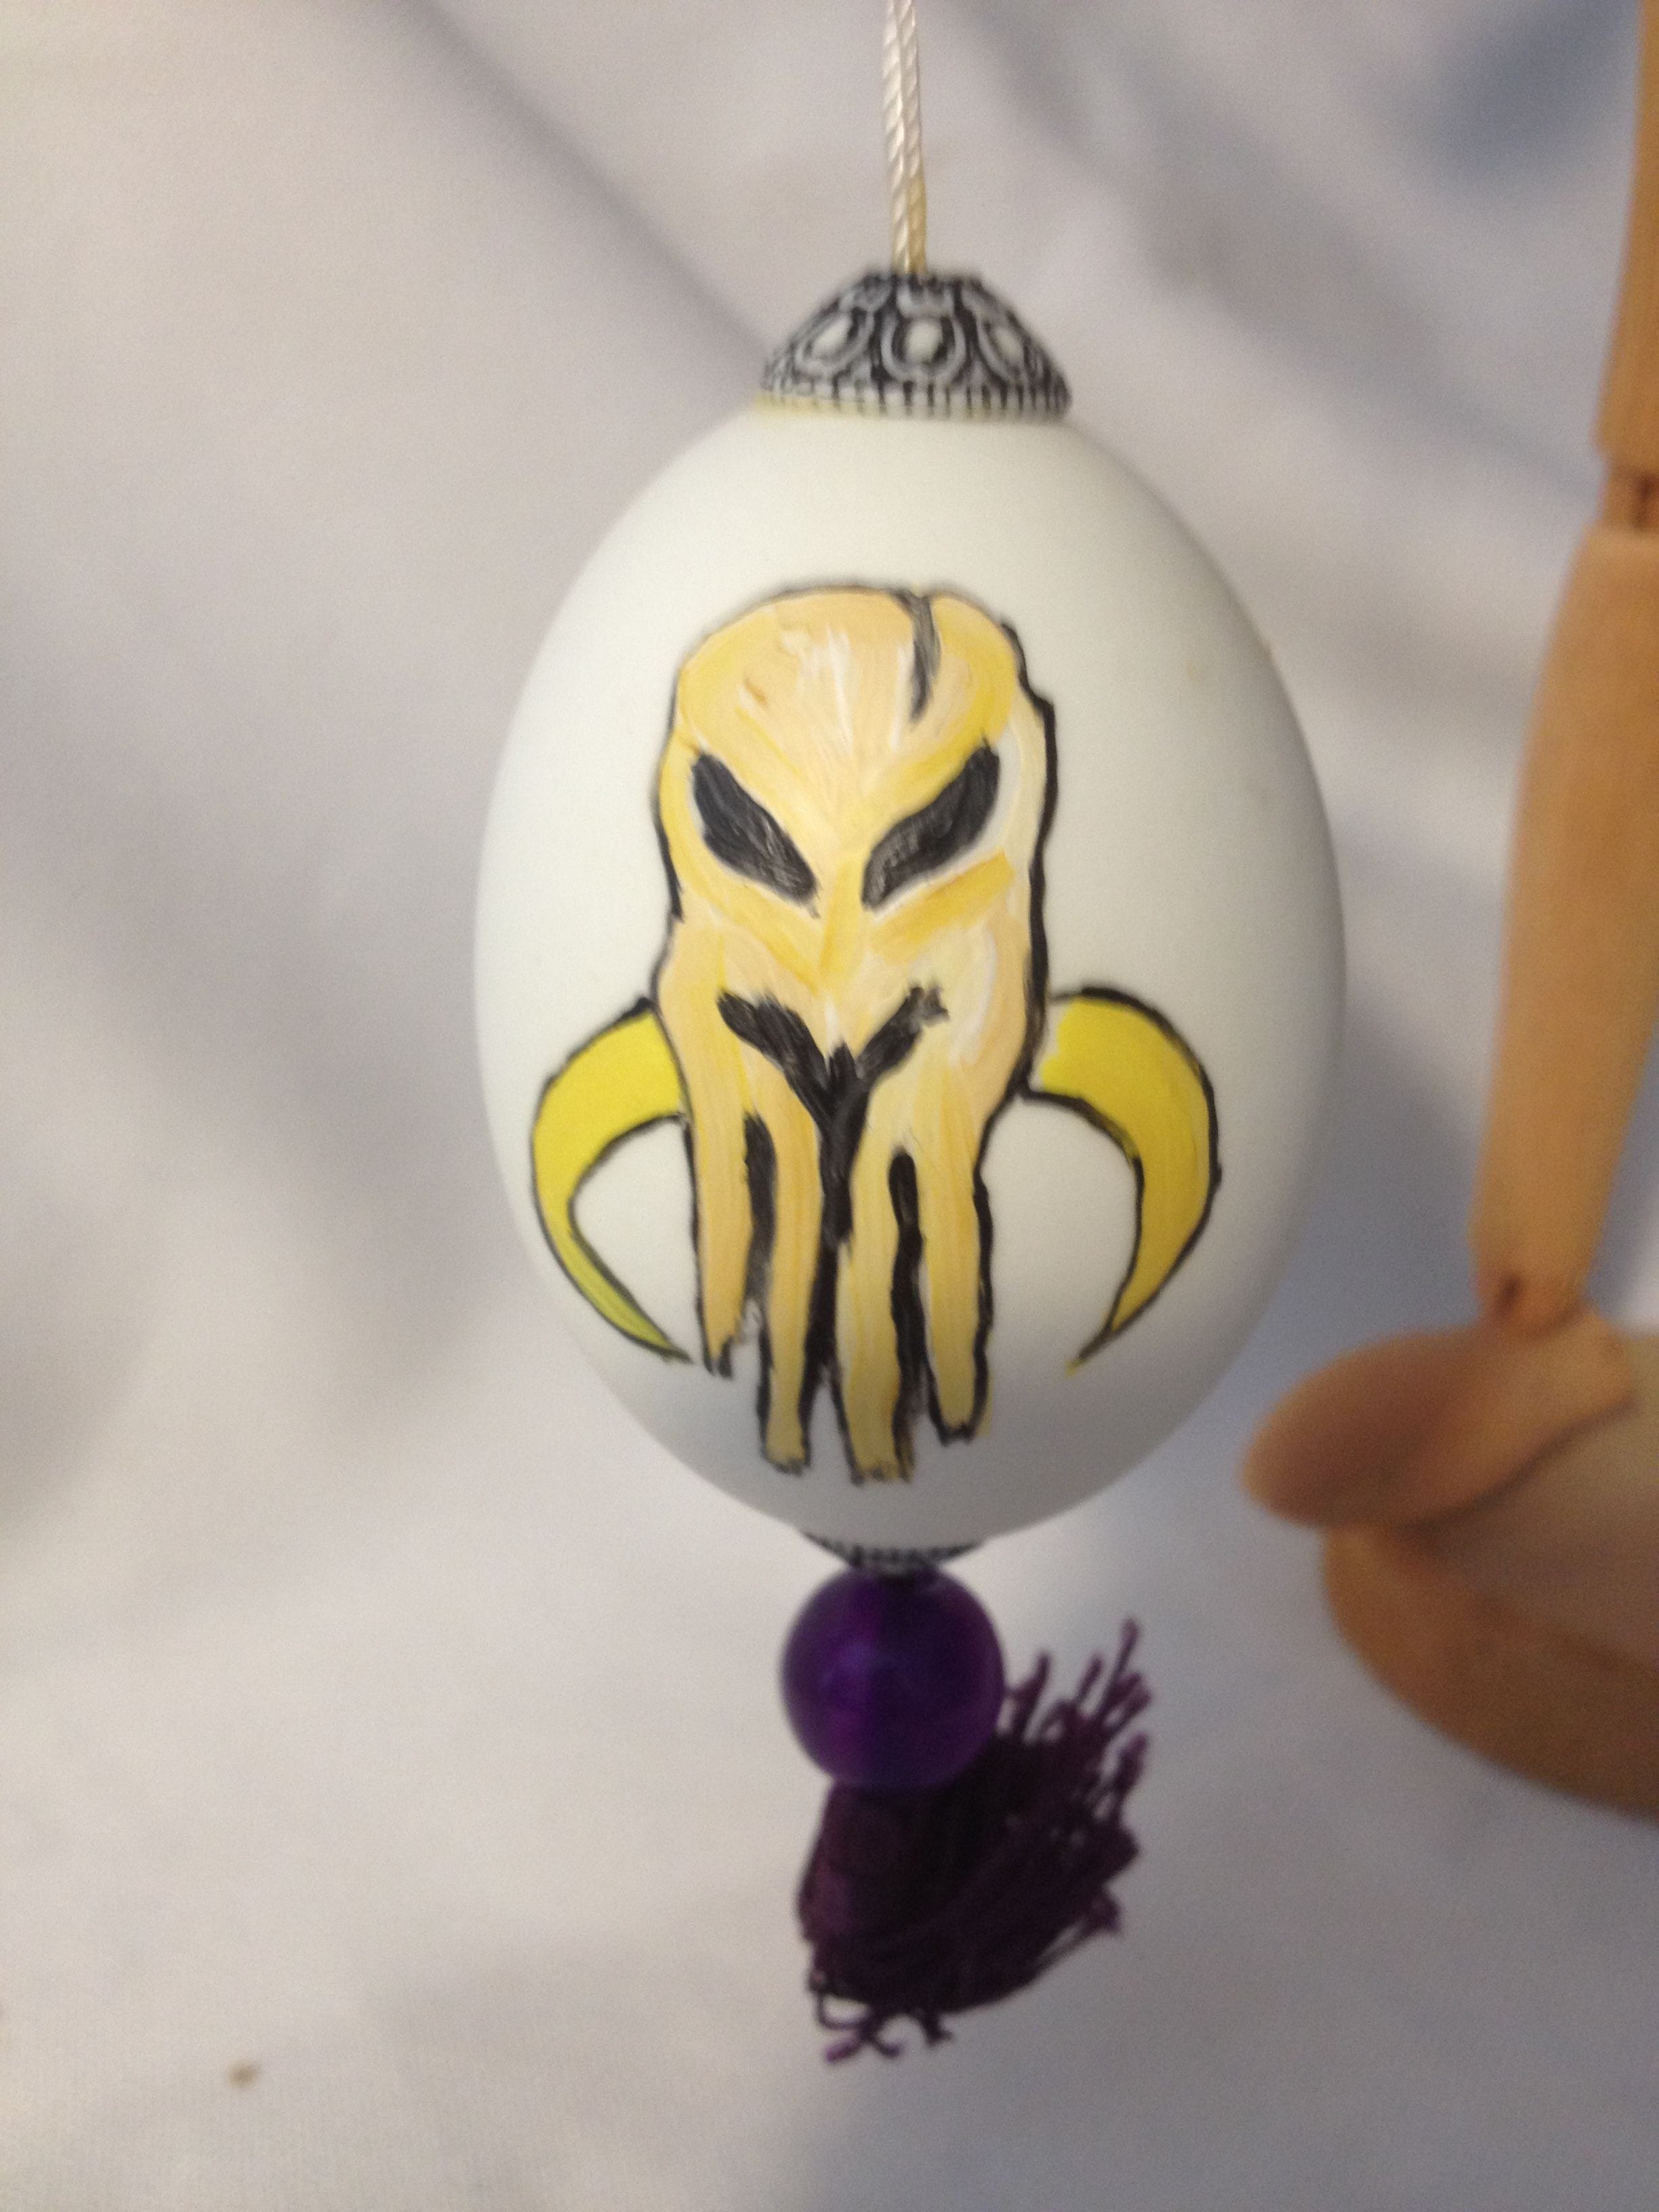 Painted chicken egg with Mandalorian emblem $20